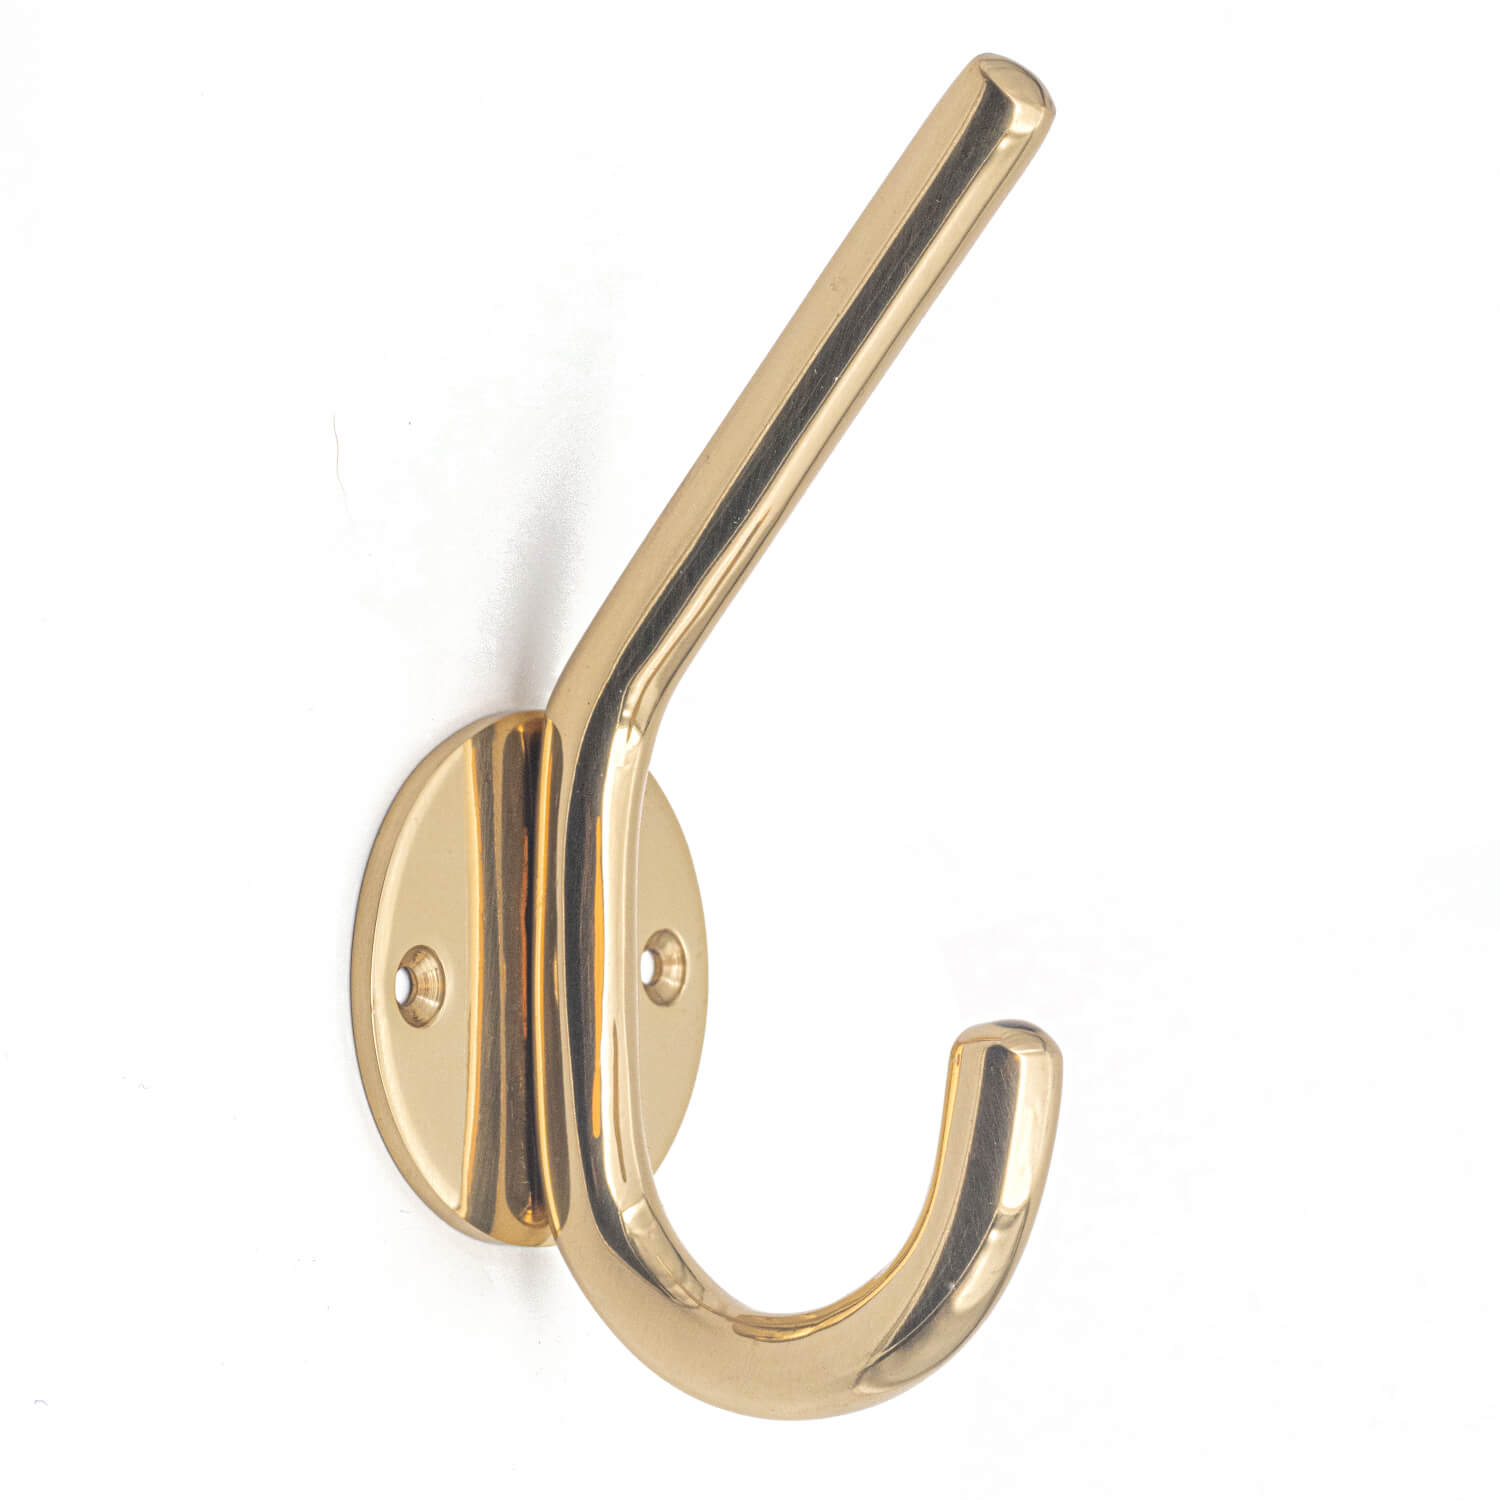 Hat hook - Classic - Brass with lacquer - Model 9203 - Hooks & Hooks -  VillaHus